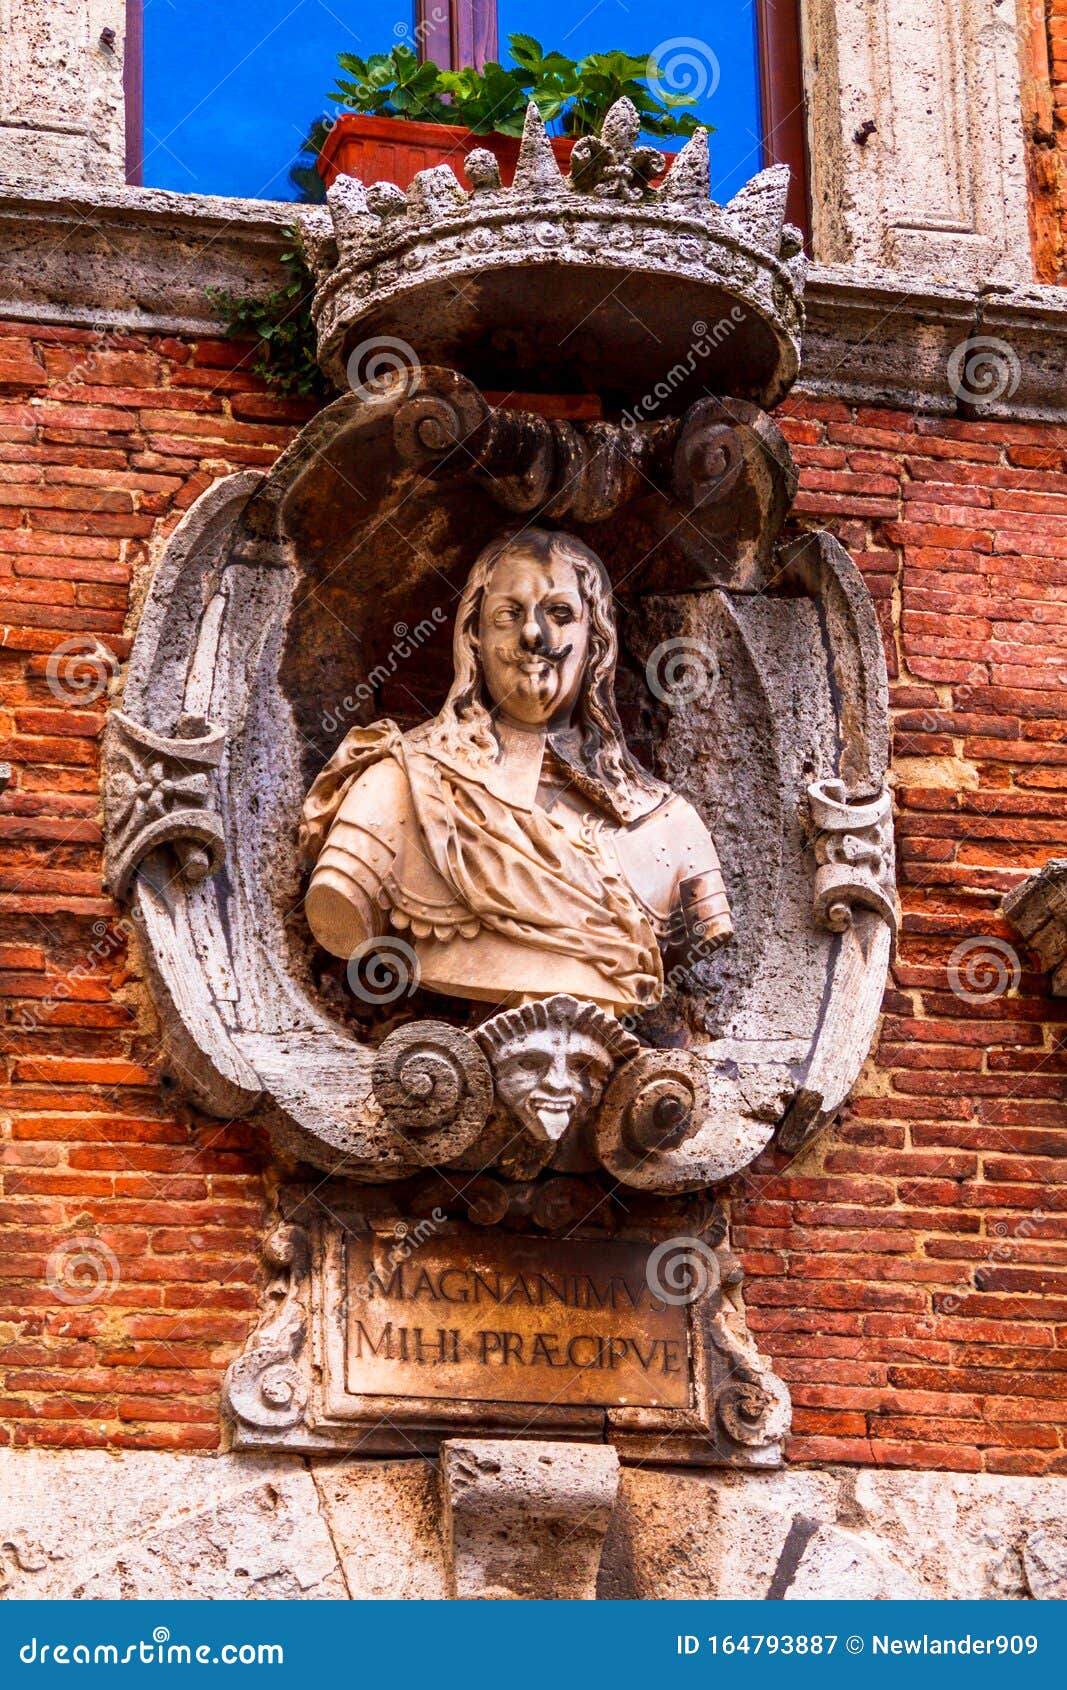 sculpture on the facade of the building in montepulciano, siena, italia